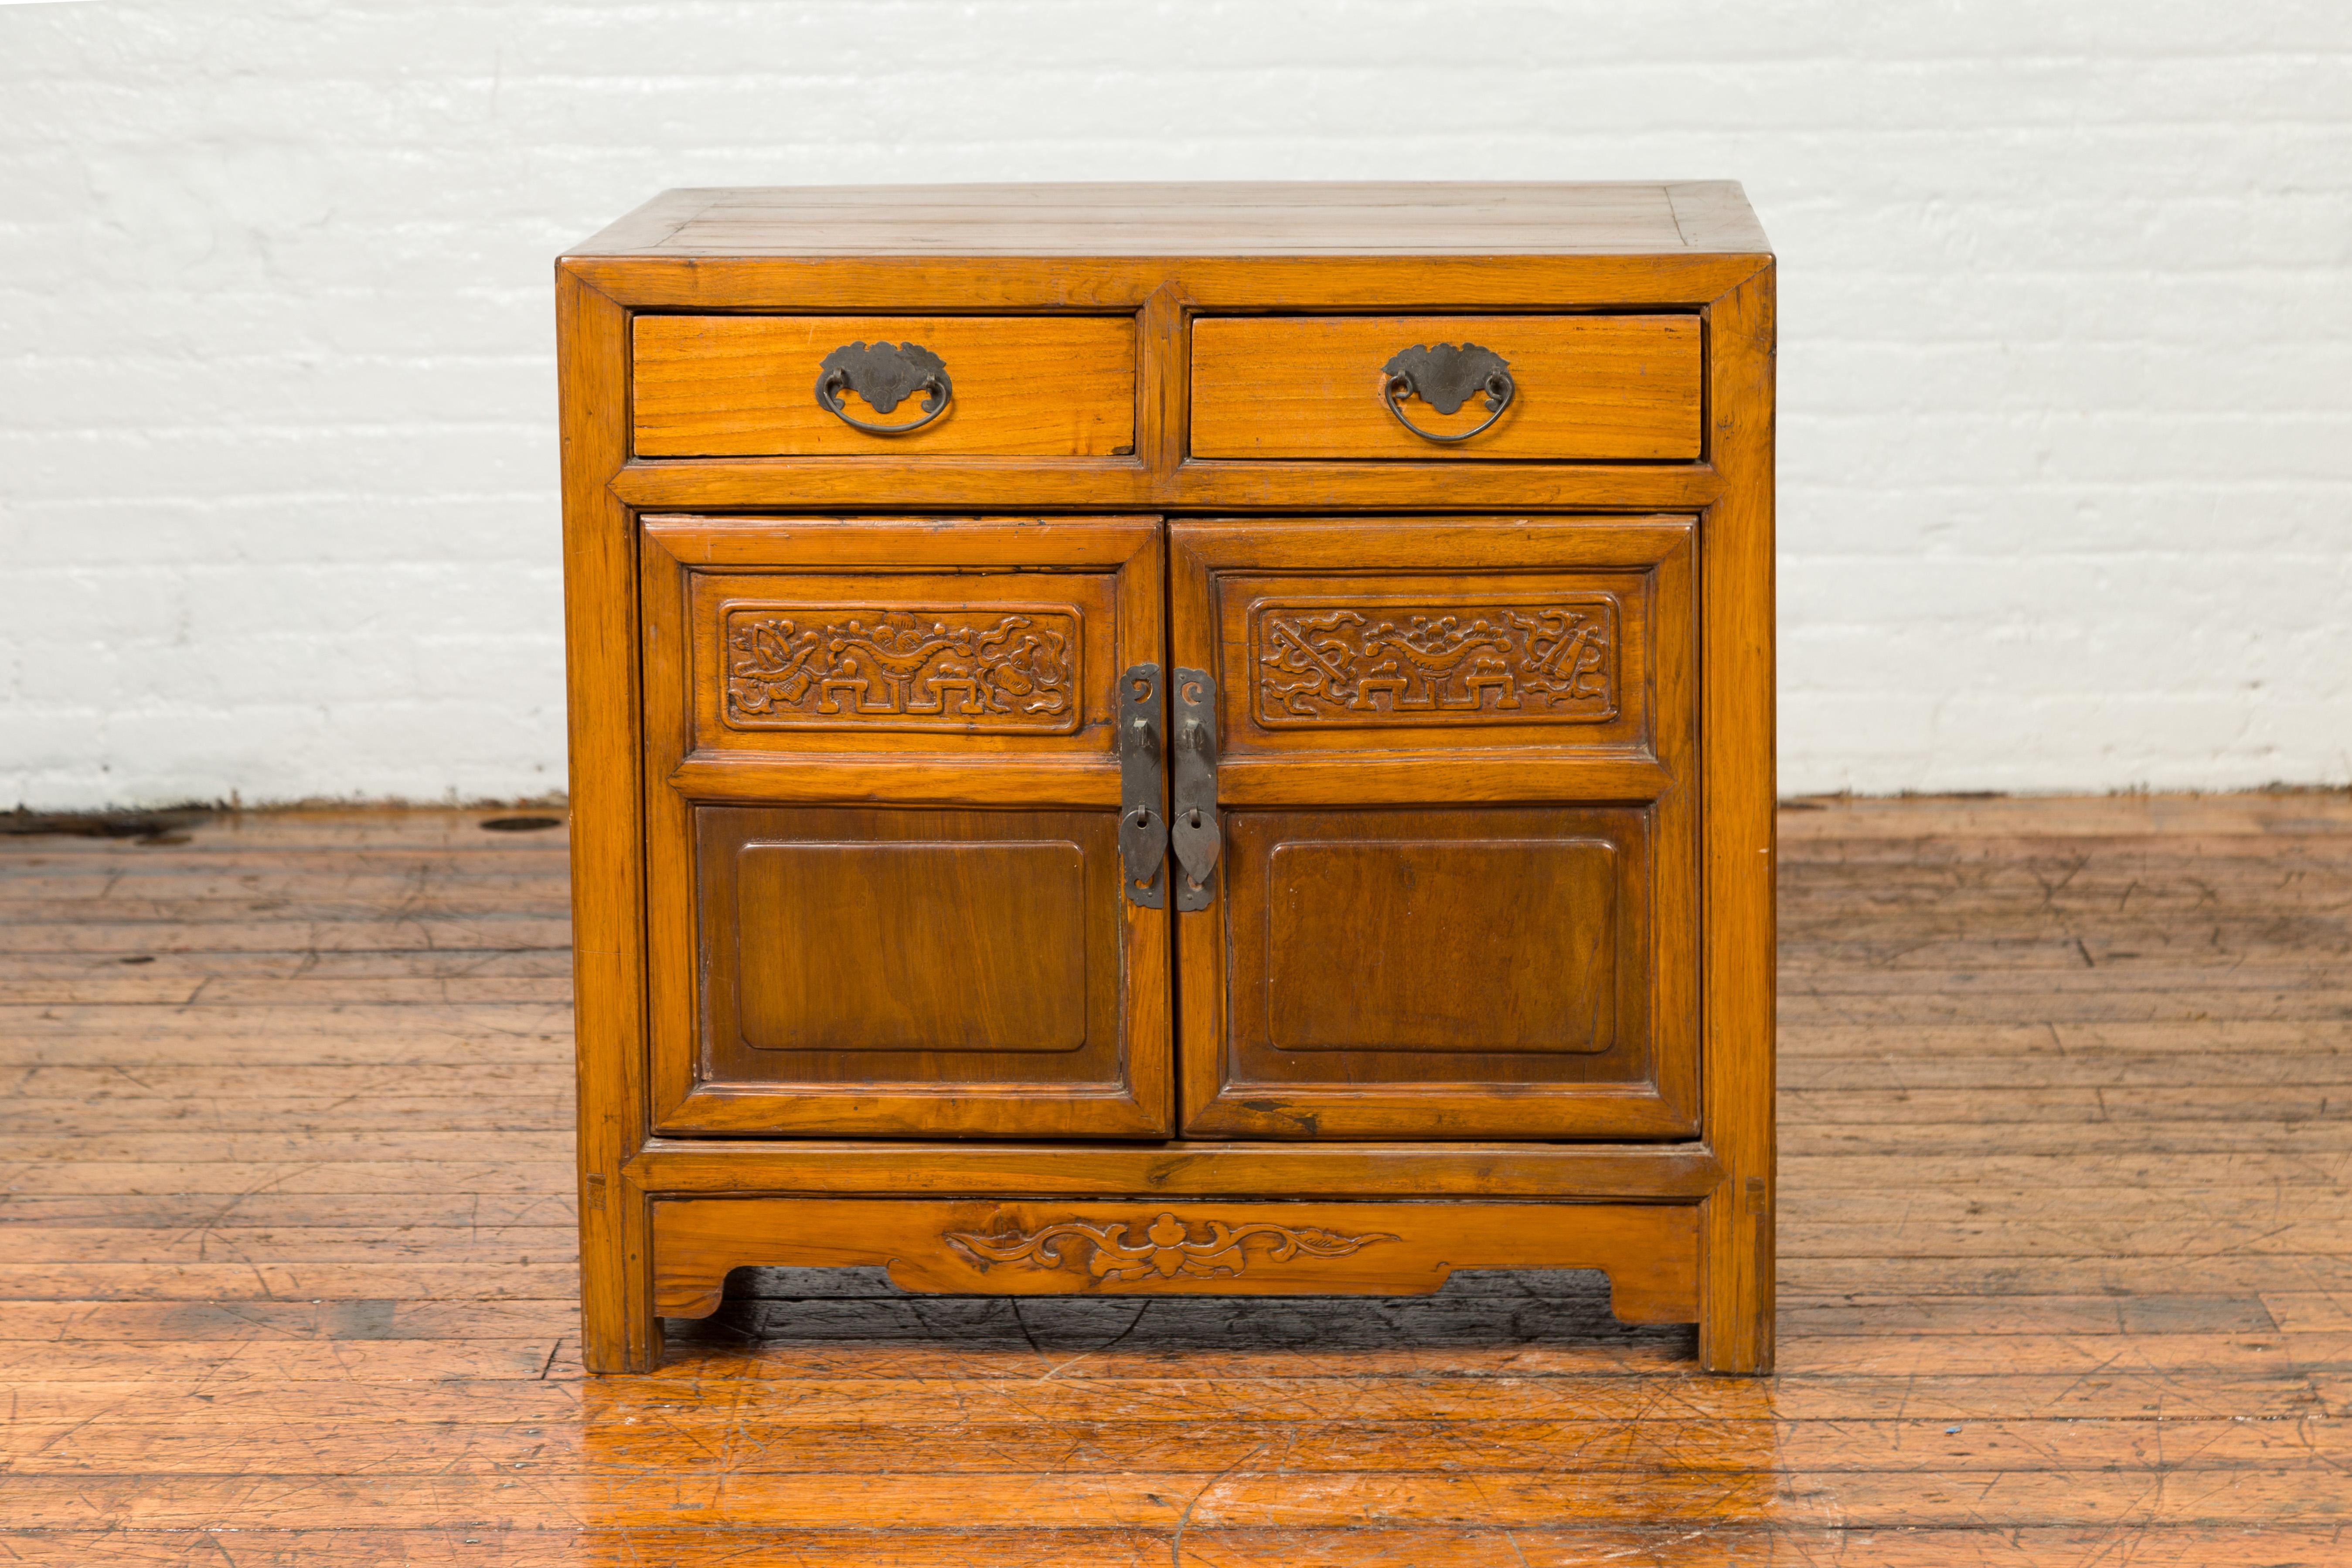 A late Qing Dynasty side chest from the early 20th century, with two drawers, carved motifs and double doors. This late Qing Dynasty Chinese side chest encapsulates the refined craftsmanship and aesthetic sensibilities of the period. With a